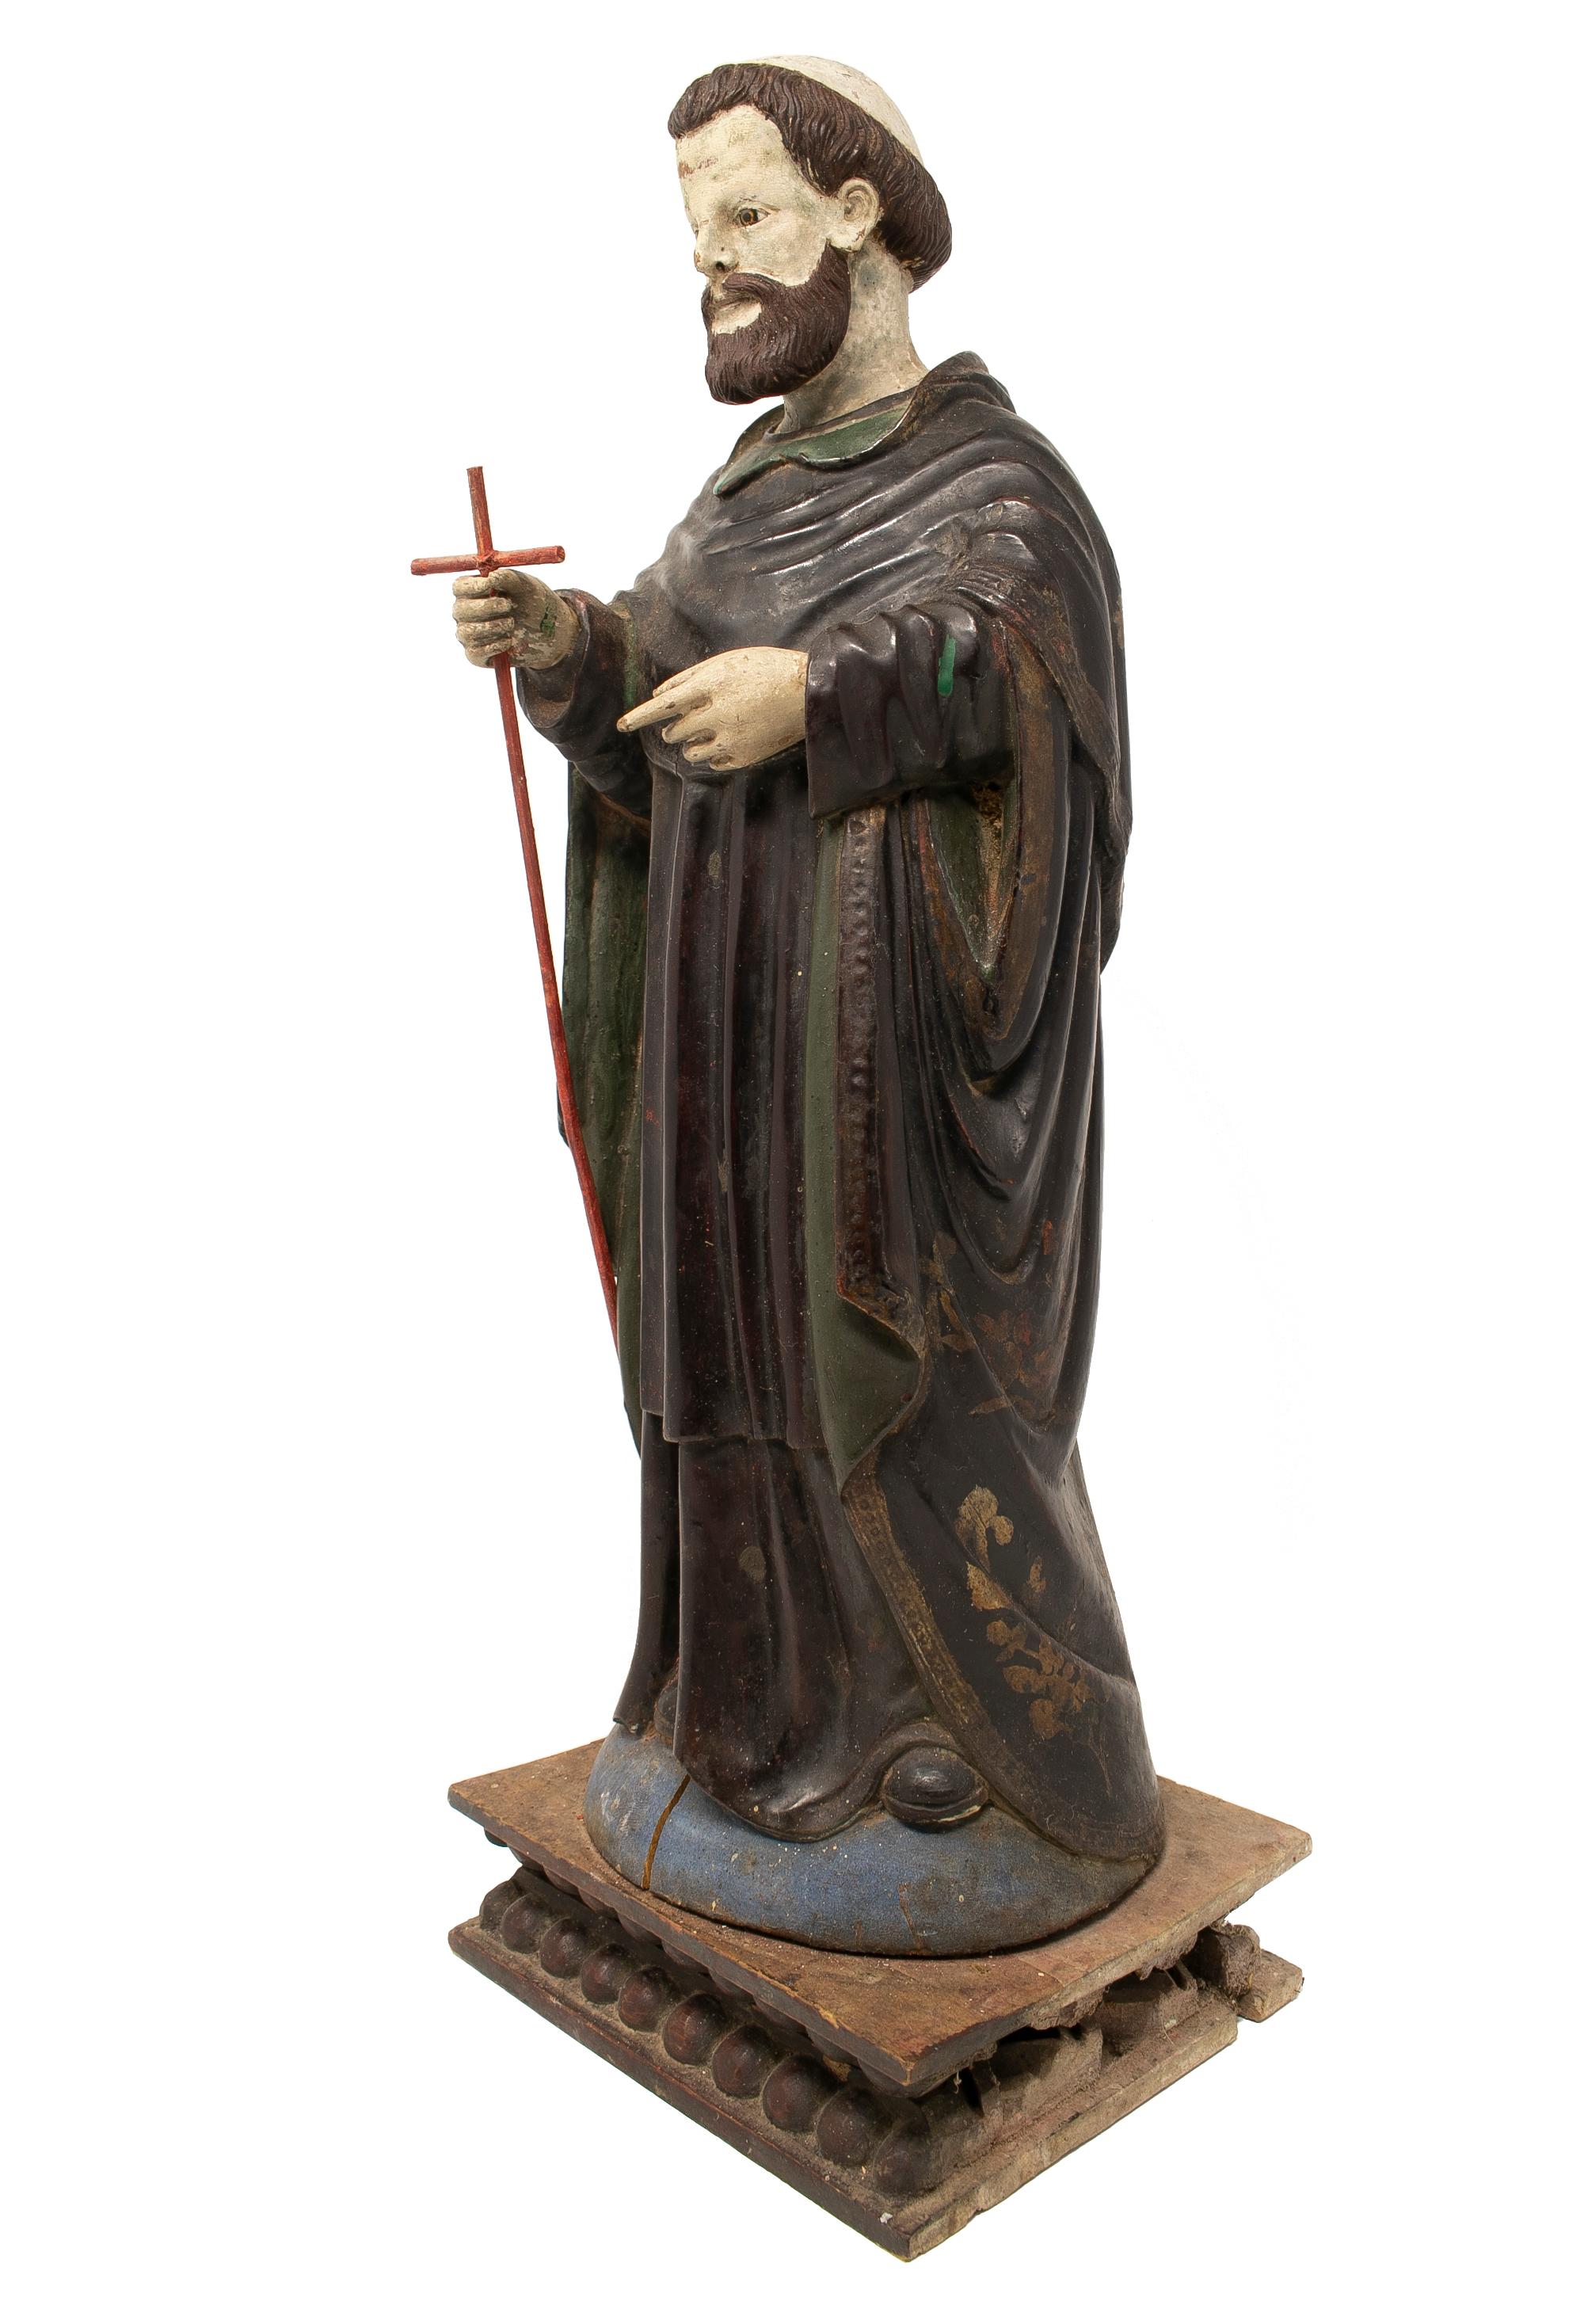 Mid-19th century Spanish painted polychrome figurative sculpture of a saint.